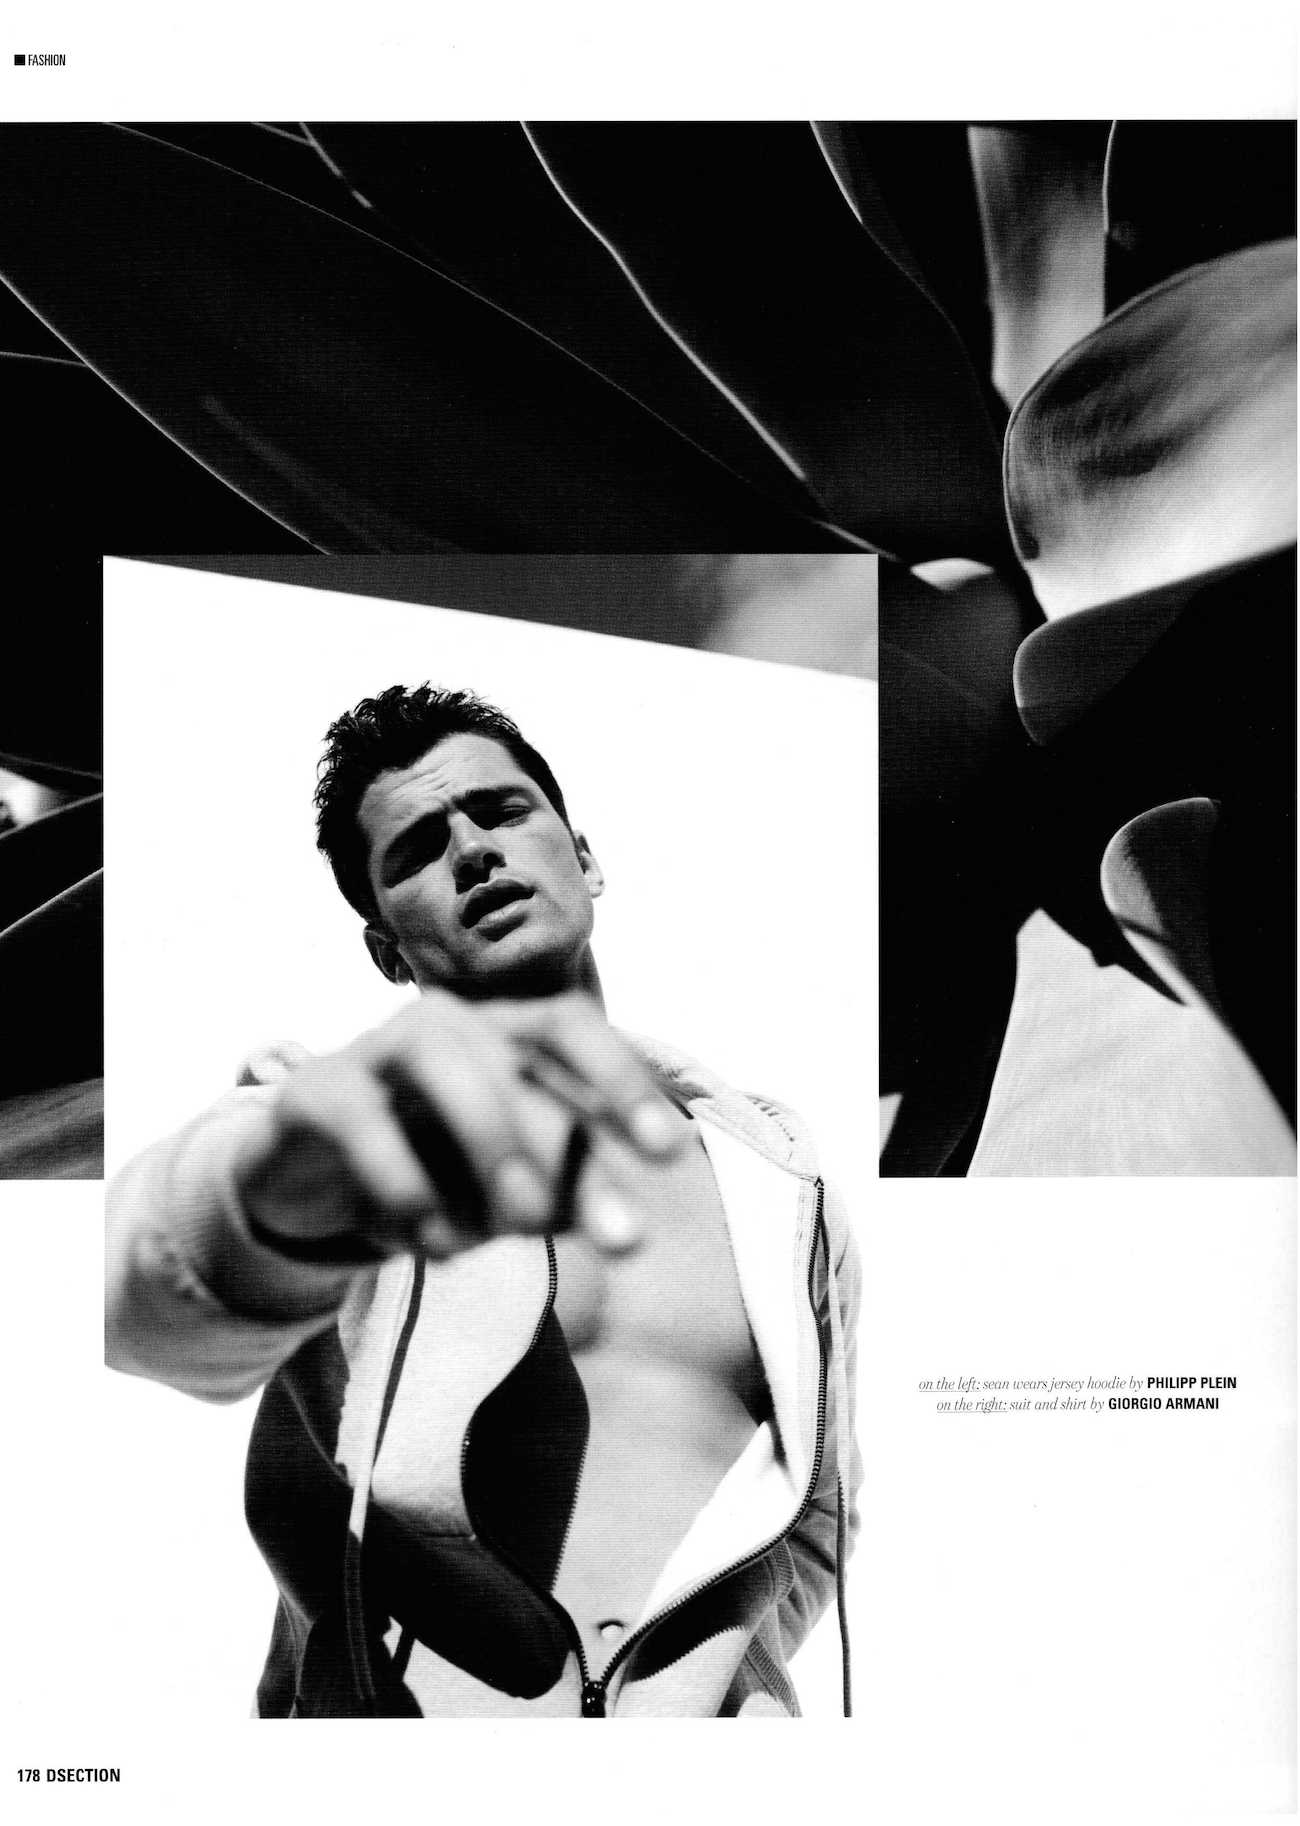 sean-opry-dsection-ss15-cover-story-013.jpg